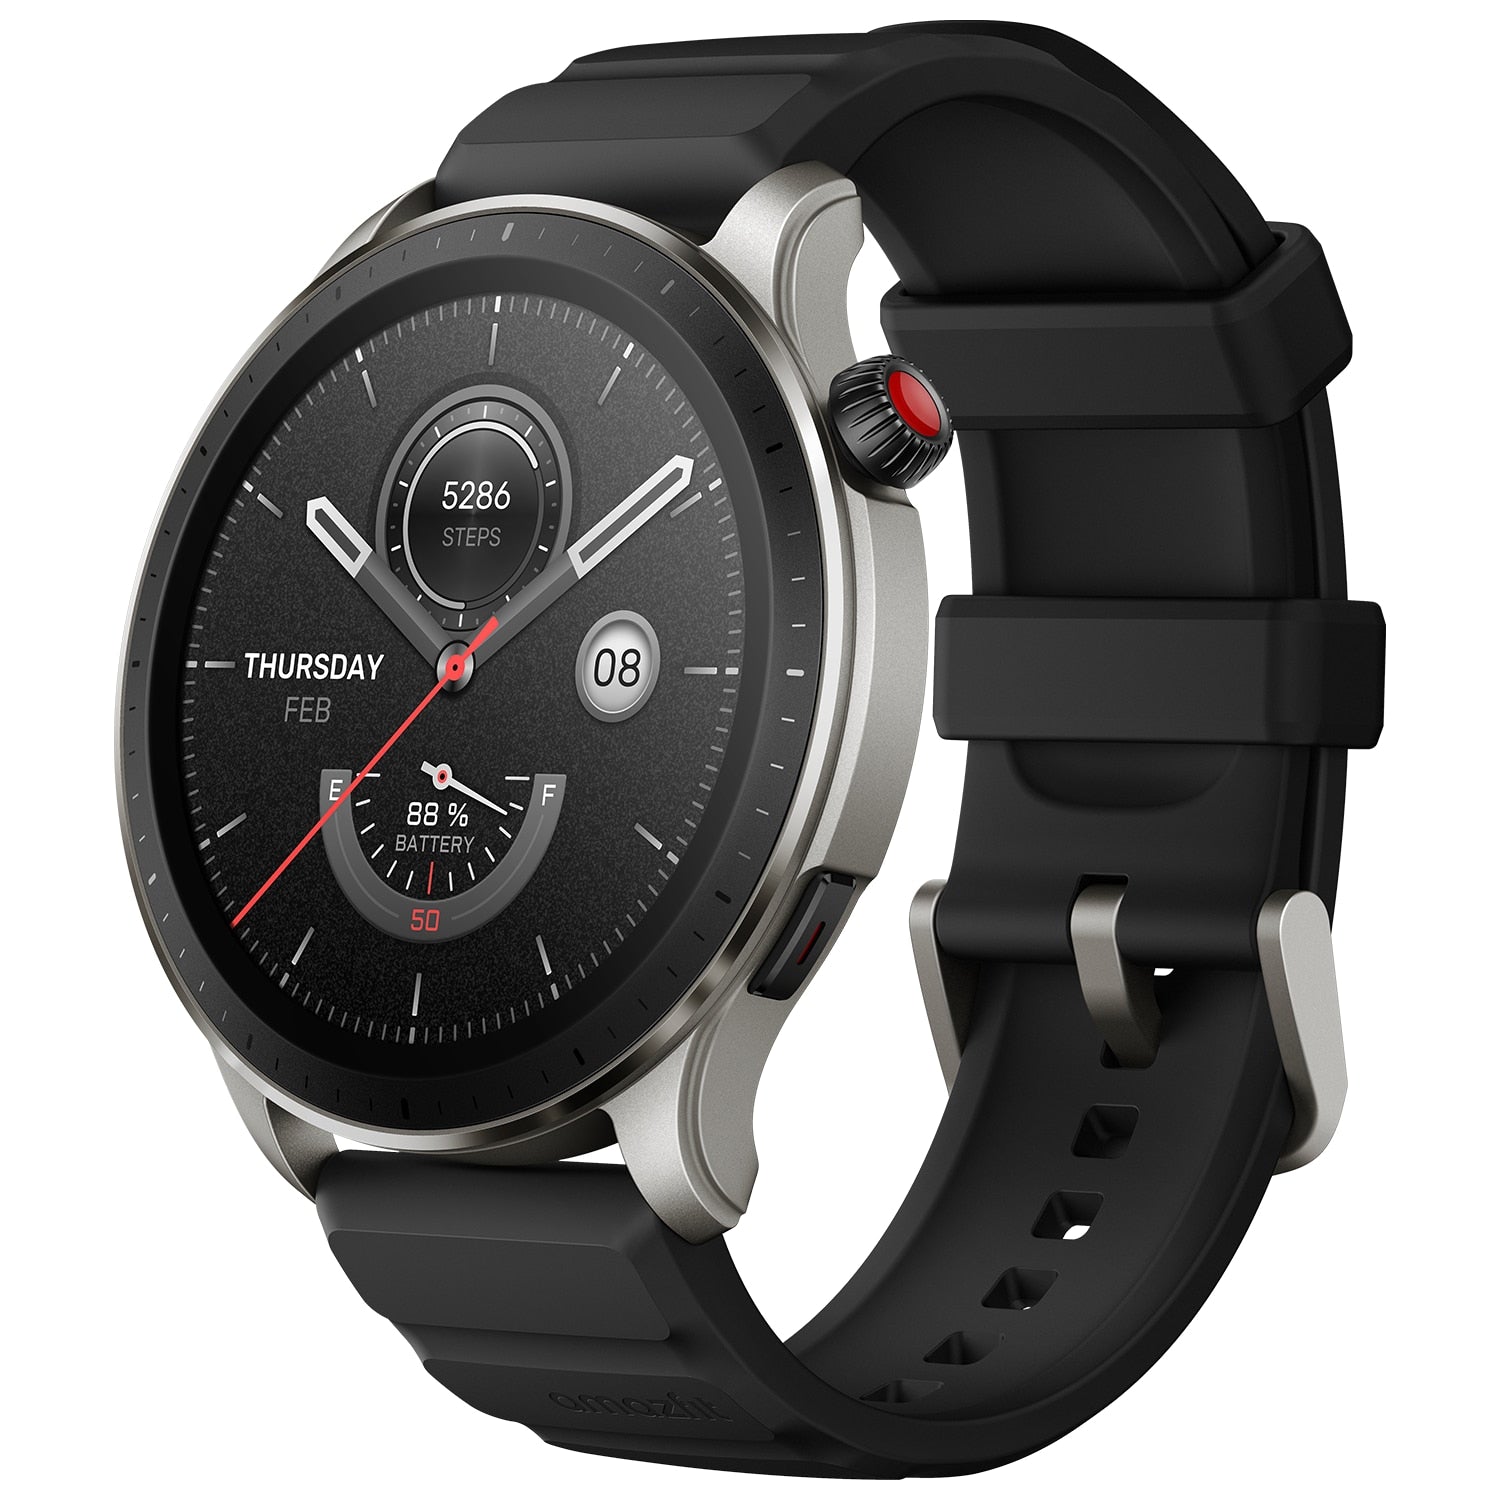 Amazfit GTR 4 Dual-band GPS Smartwatch - Positioning & 150+ Sports Modes